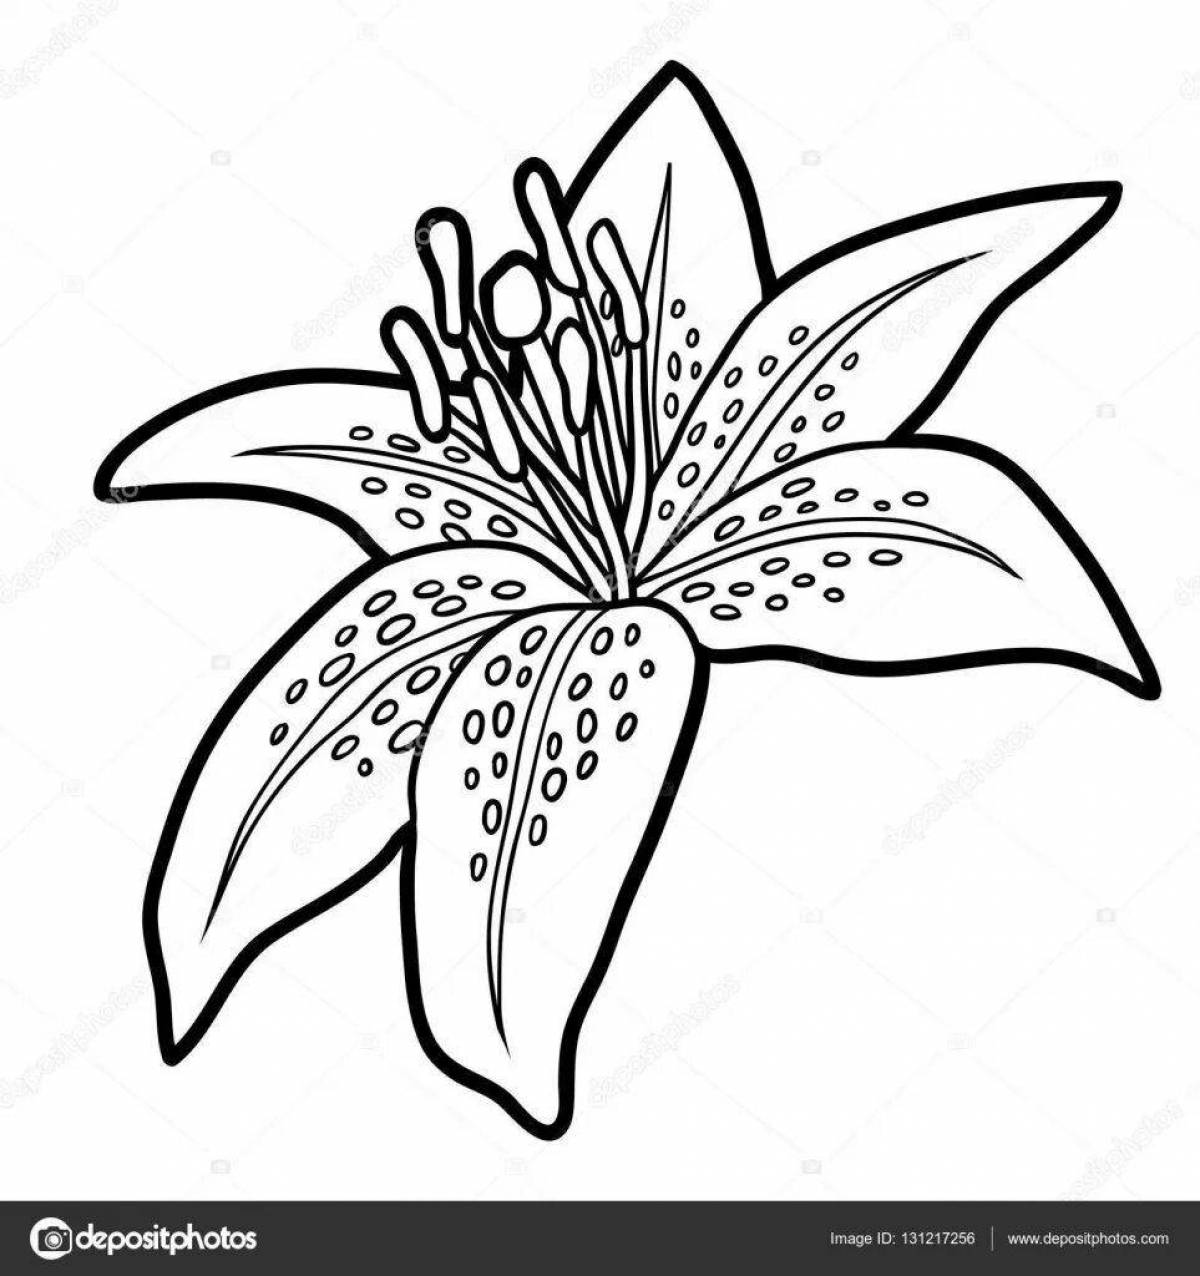 Delicate coloring of lily flowers